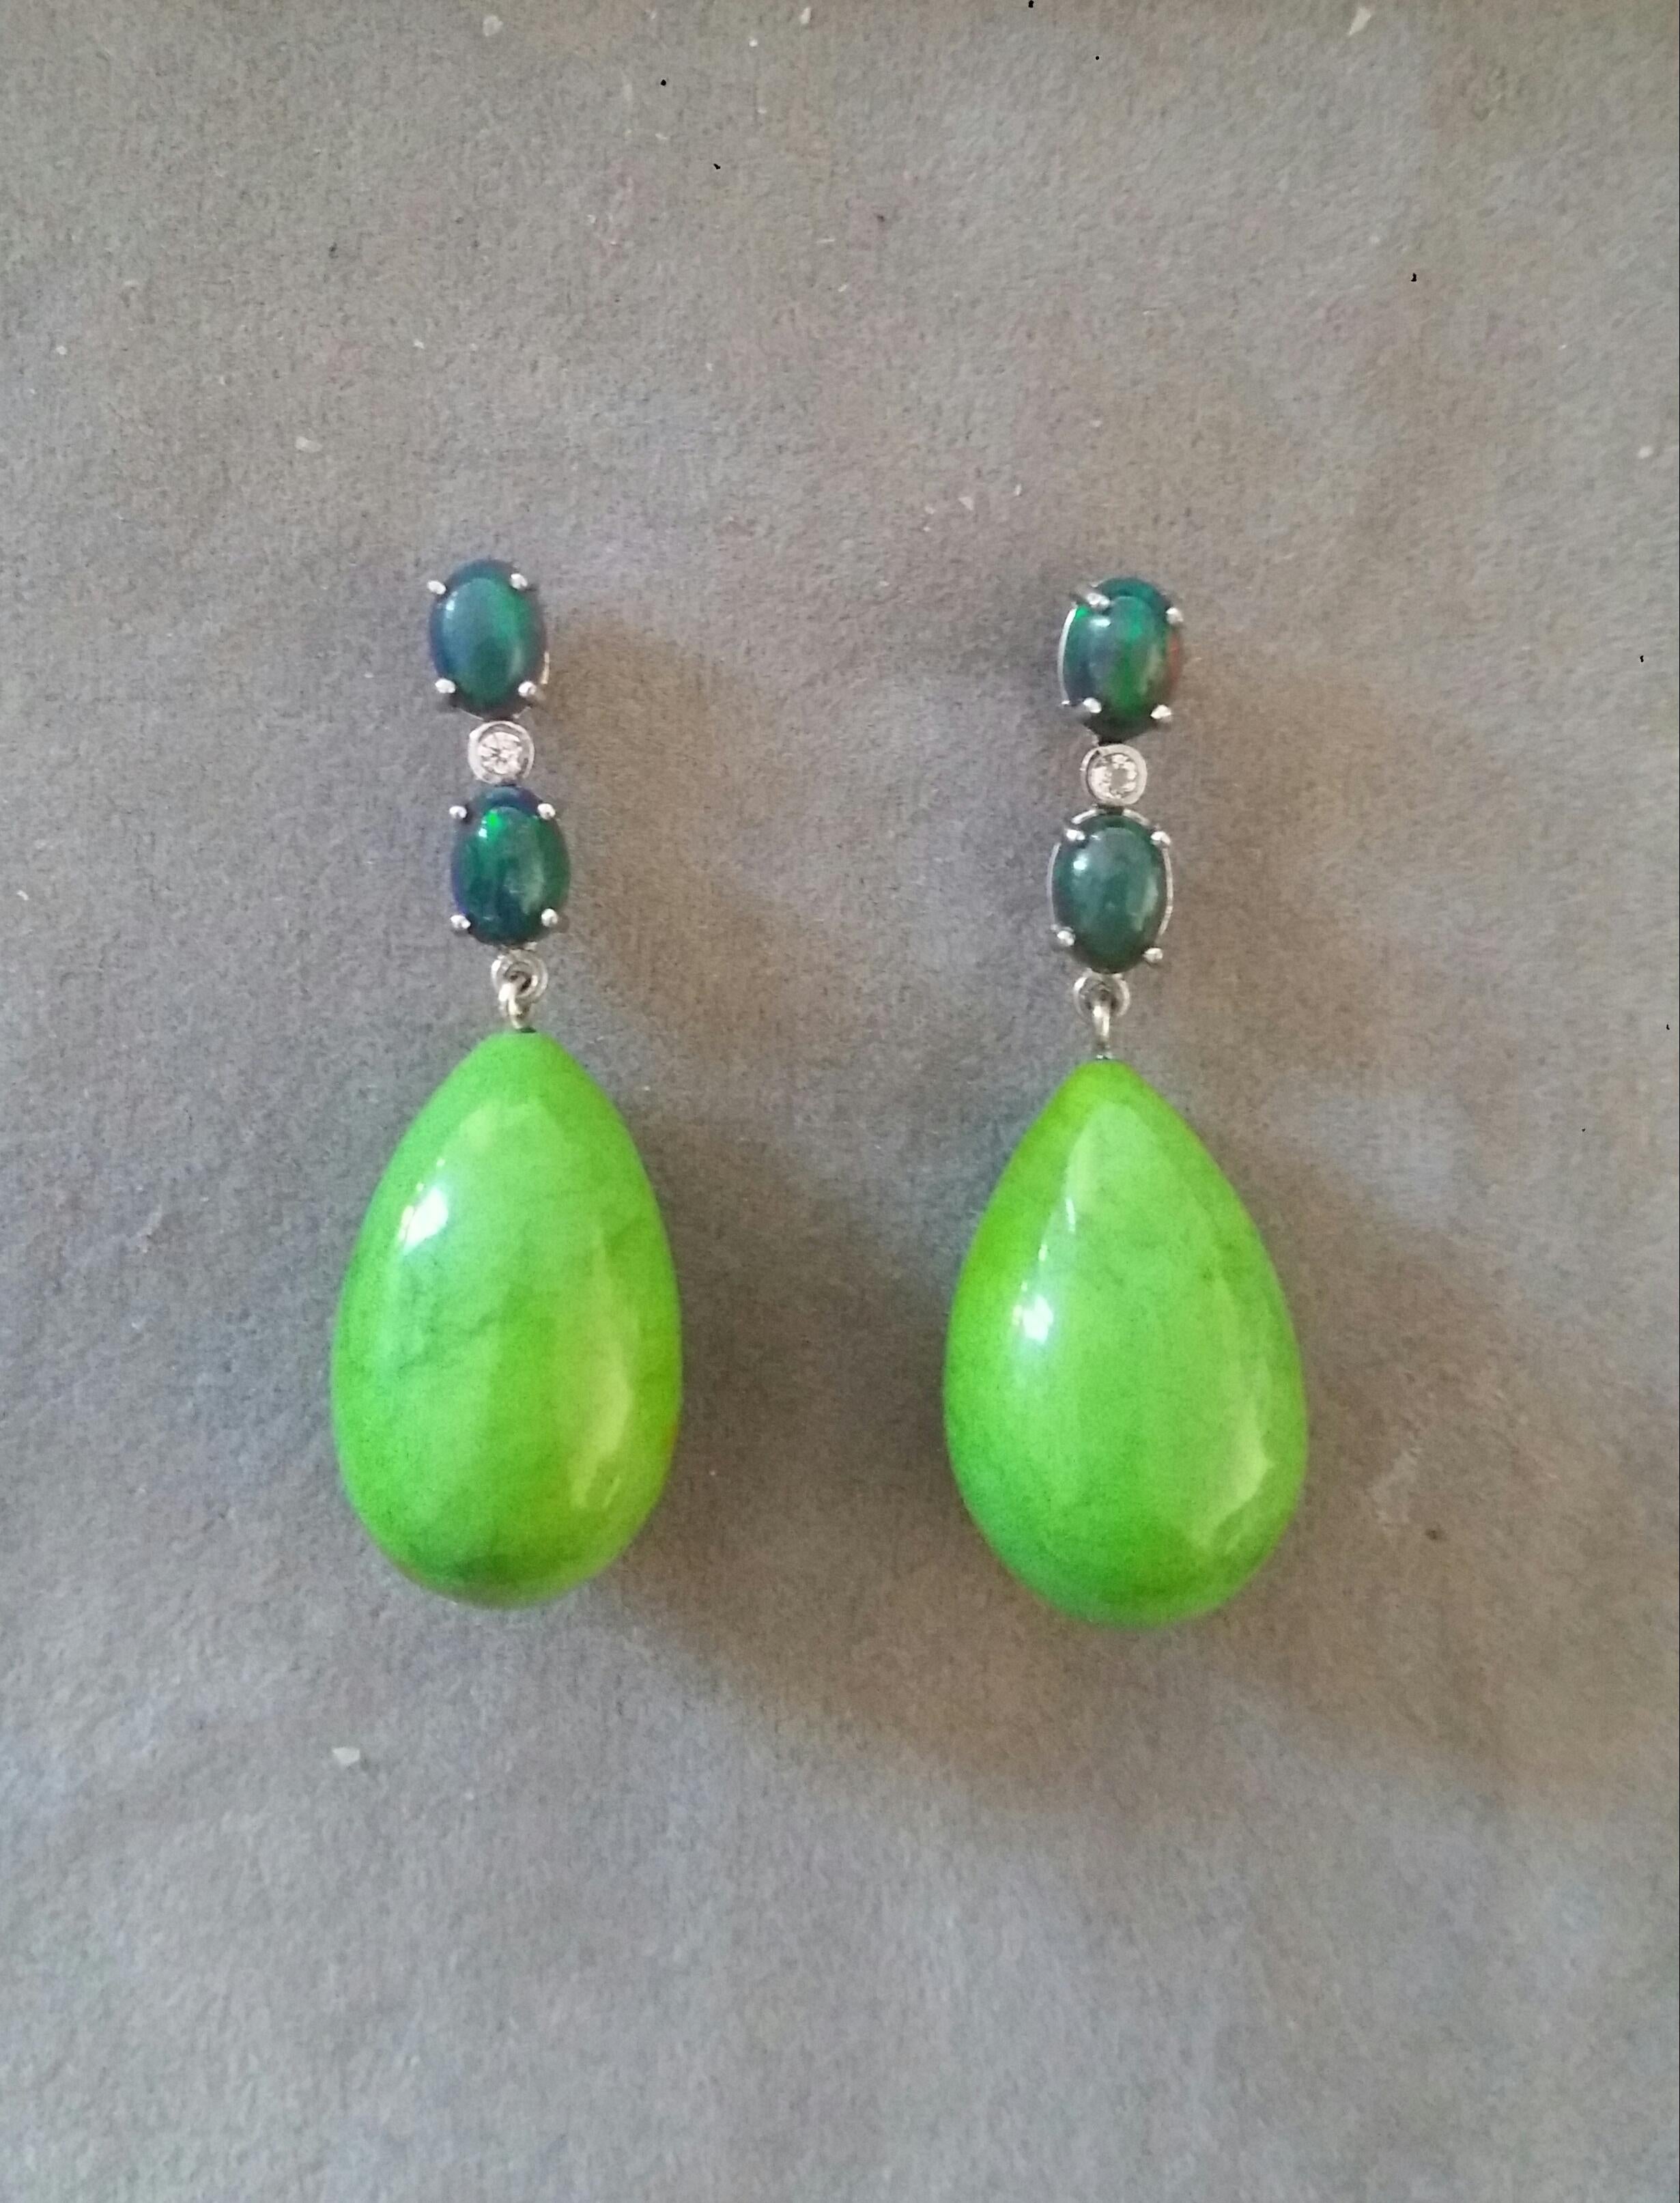 Elegant and completely handmade Earrings consisting of an upper part of 2 oval shape Natural Black Opal  cabs of 5 mm x 7 mm set together in 14 Kt white gold with a  small diamond in the middle, at the bottom 2 Turkmenistan Green Turquoise Drops